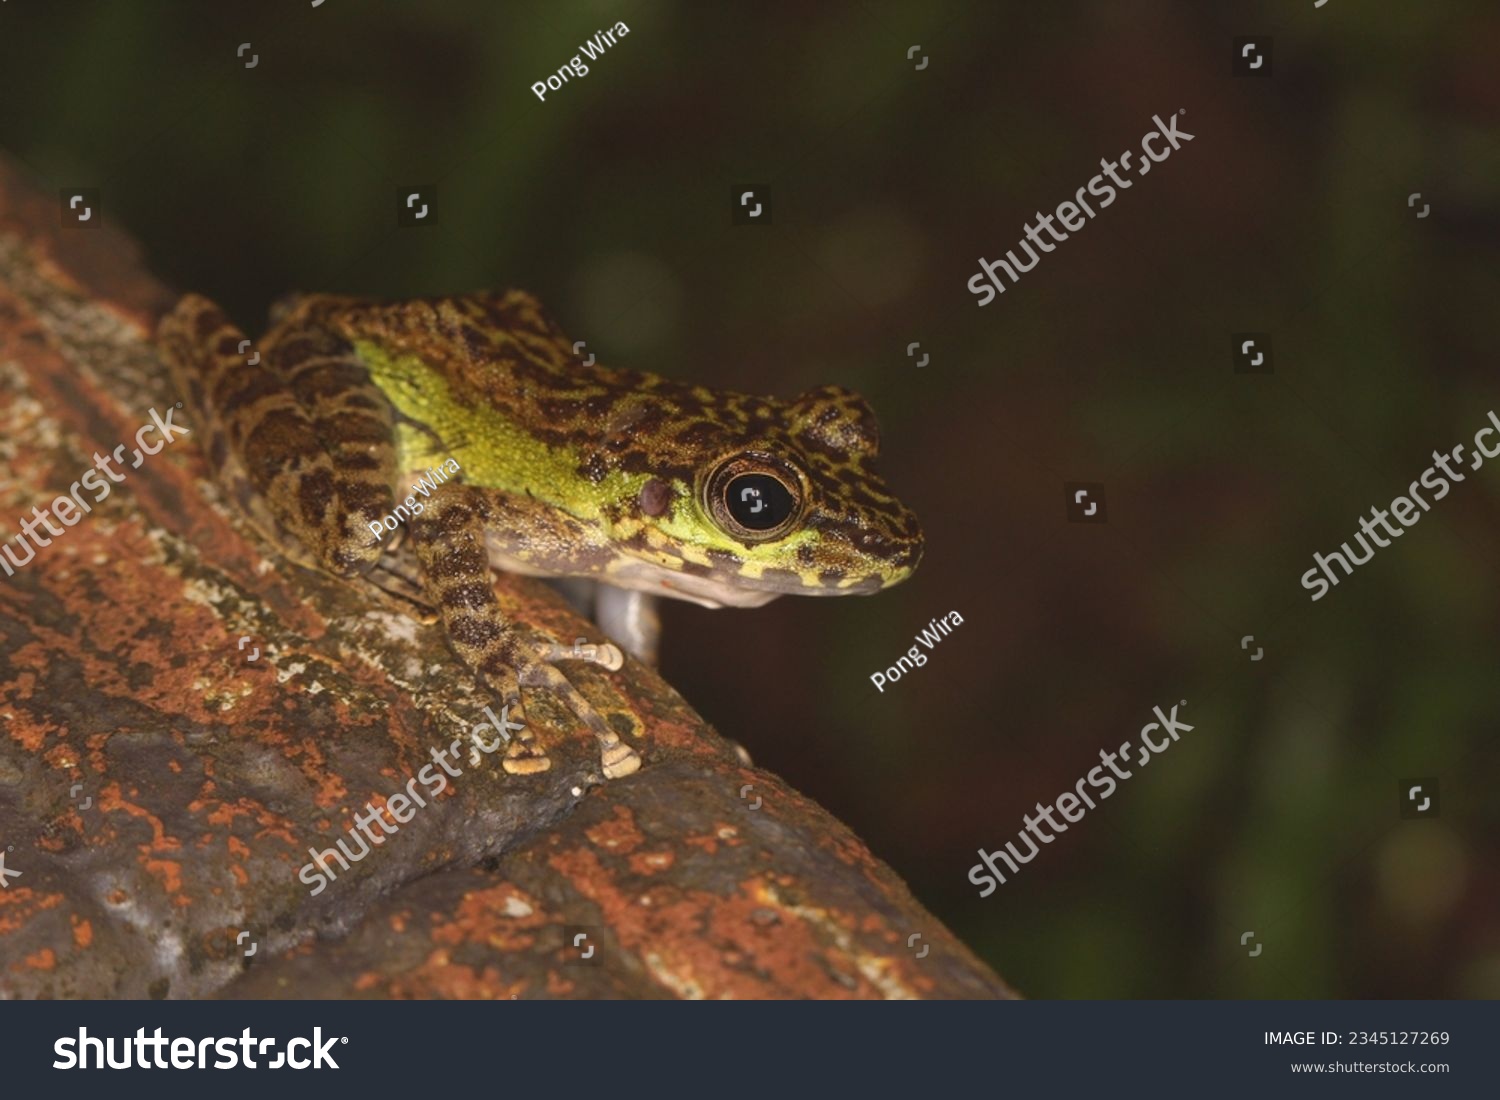 Peninsular torrentfrog, Panha's Marbled Frog, Marbled Tenasserim Frog (Amolops panhai, Ranidae) is a species of true frog that can be found in western and peninsular Thailand and in eastern Myanmar. #2345127269